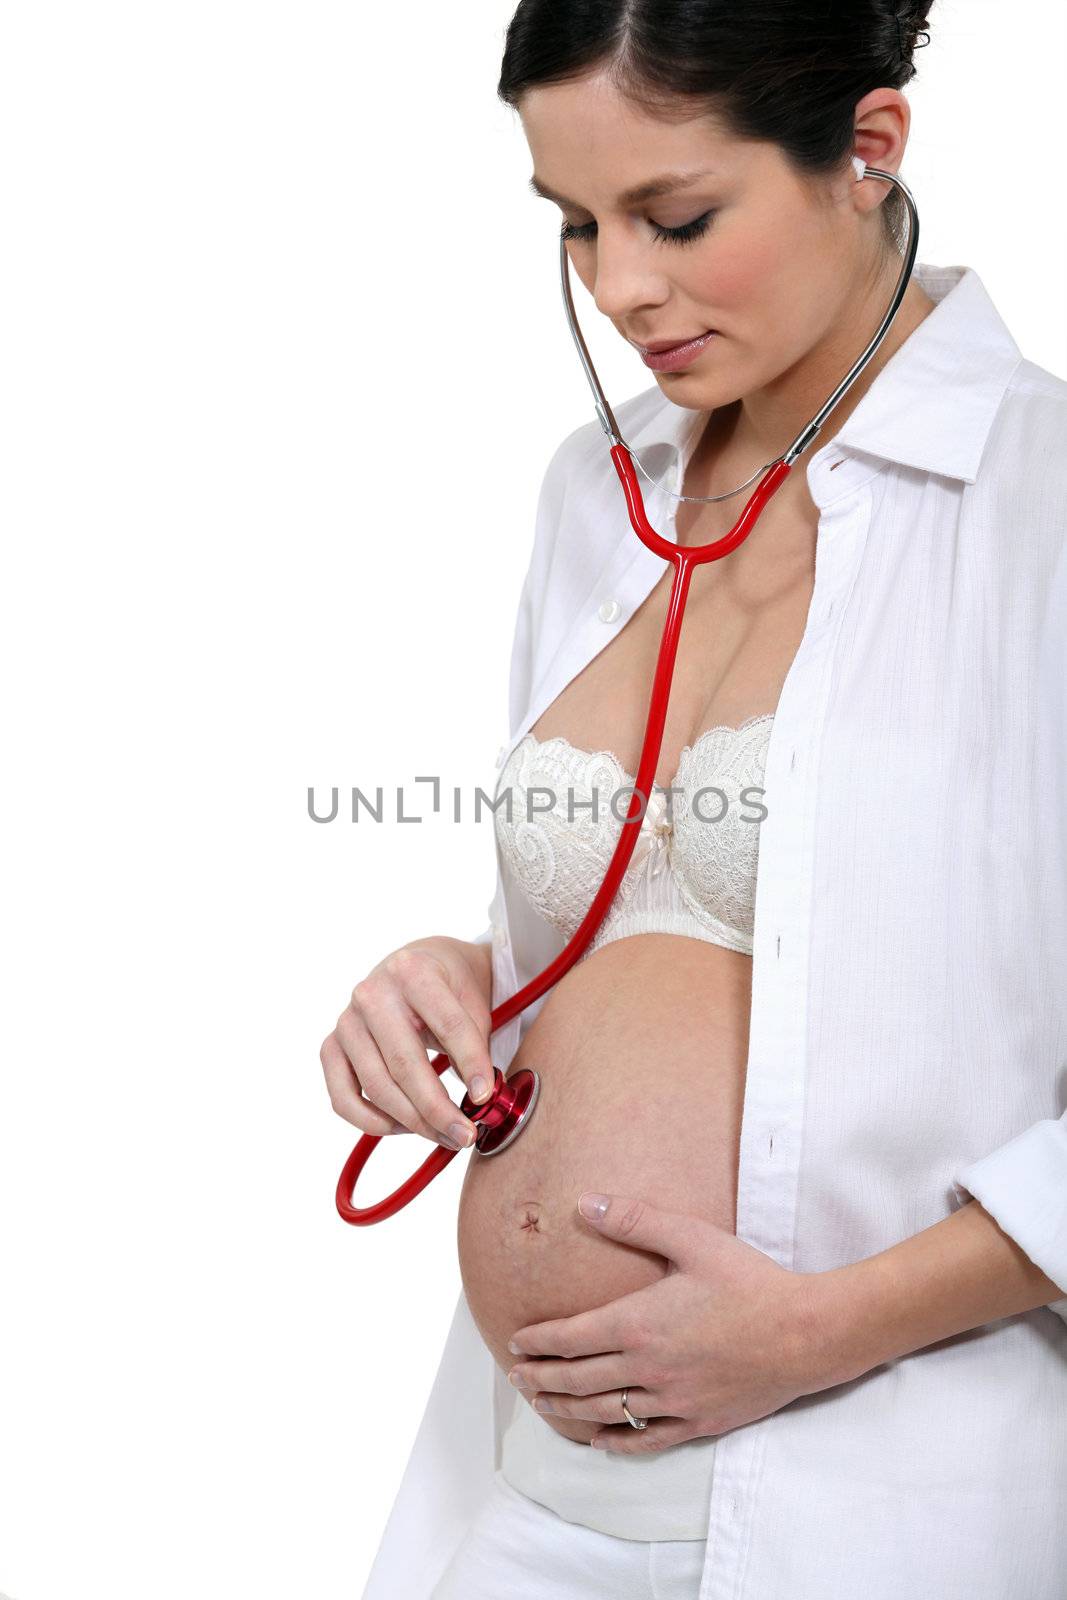 Pregnant woman with a stethoscope by phovoir